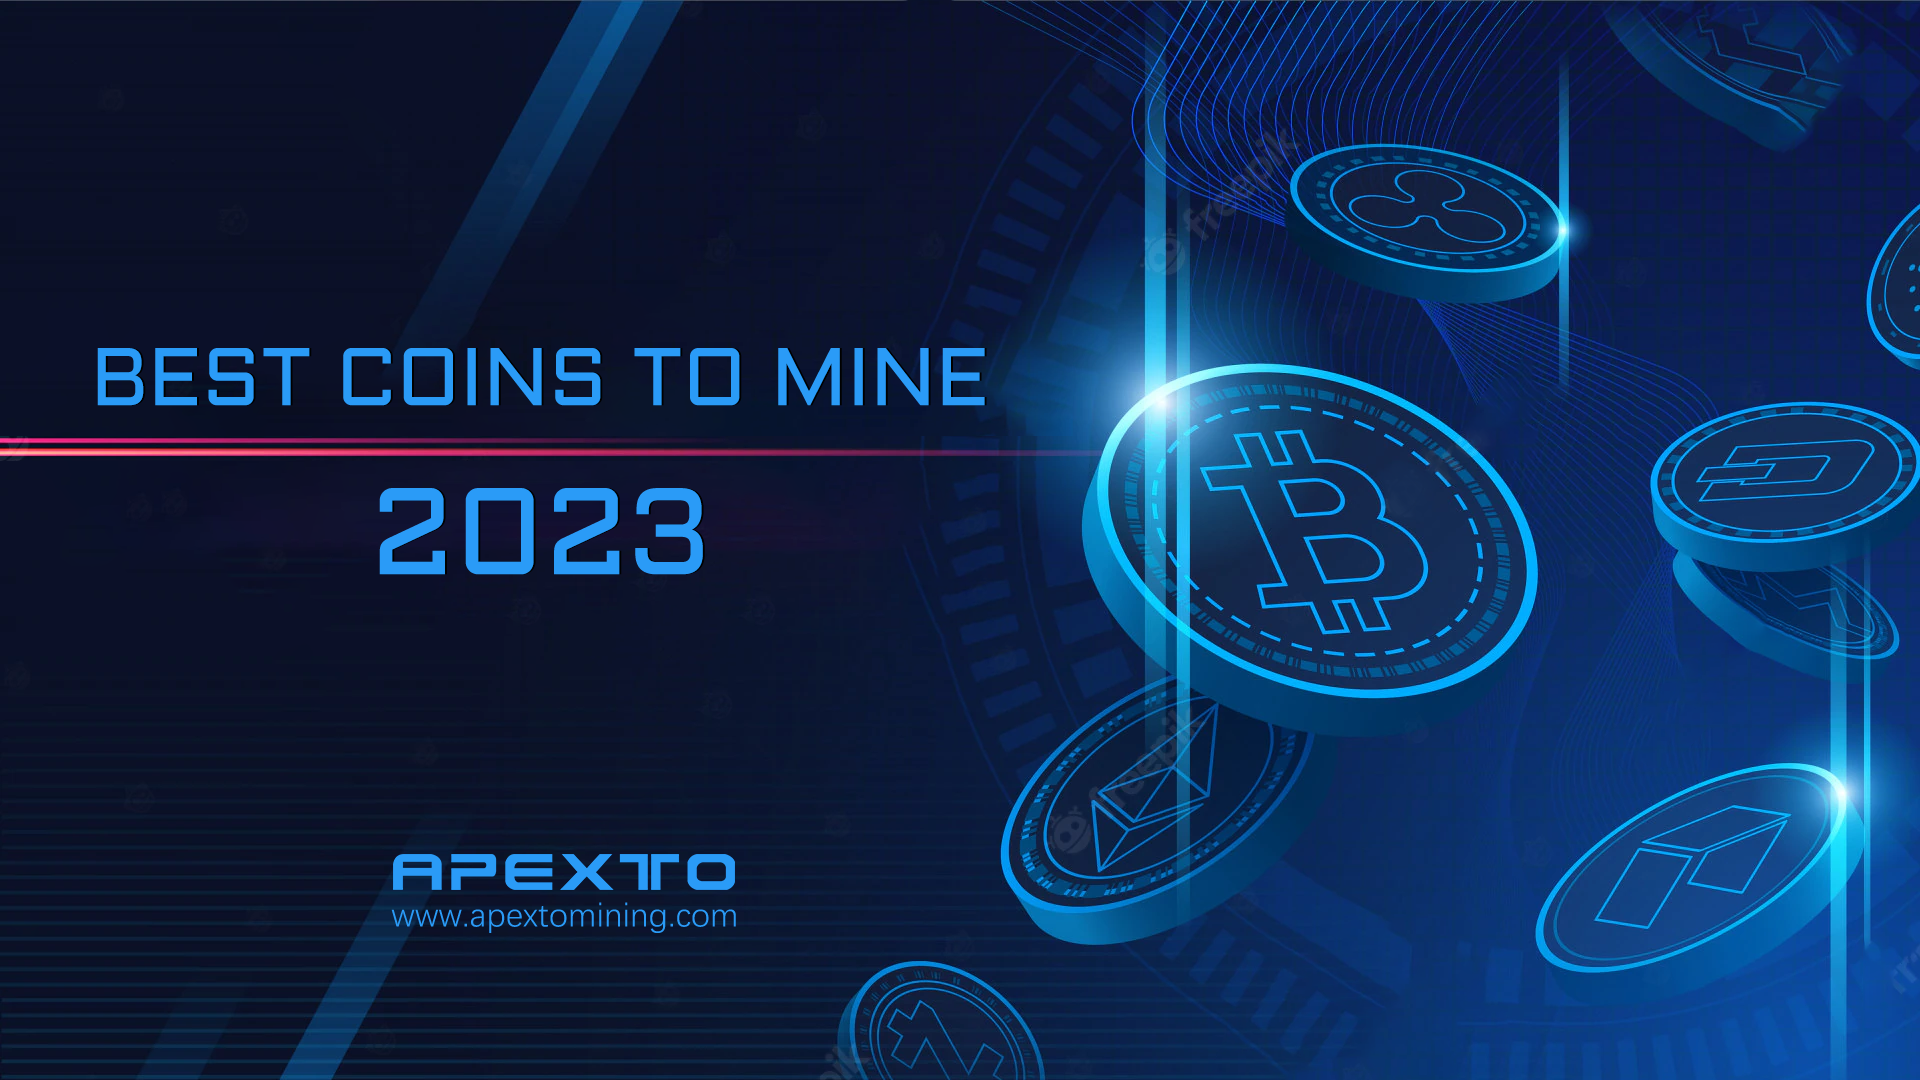 The best coins to mine in 2023